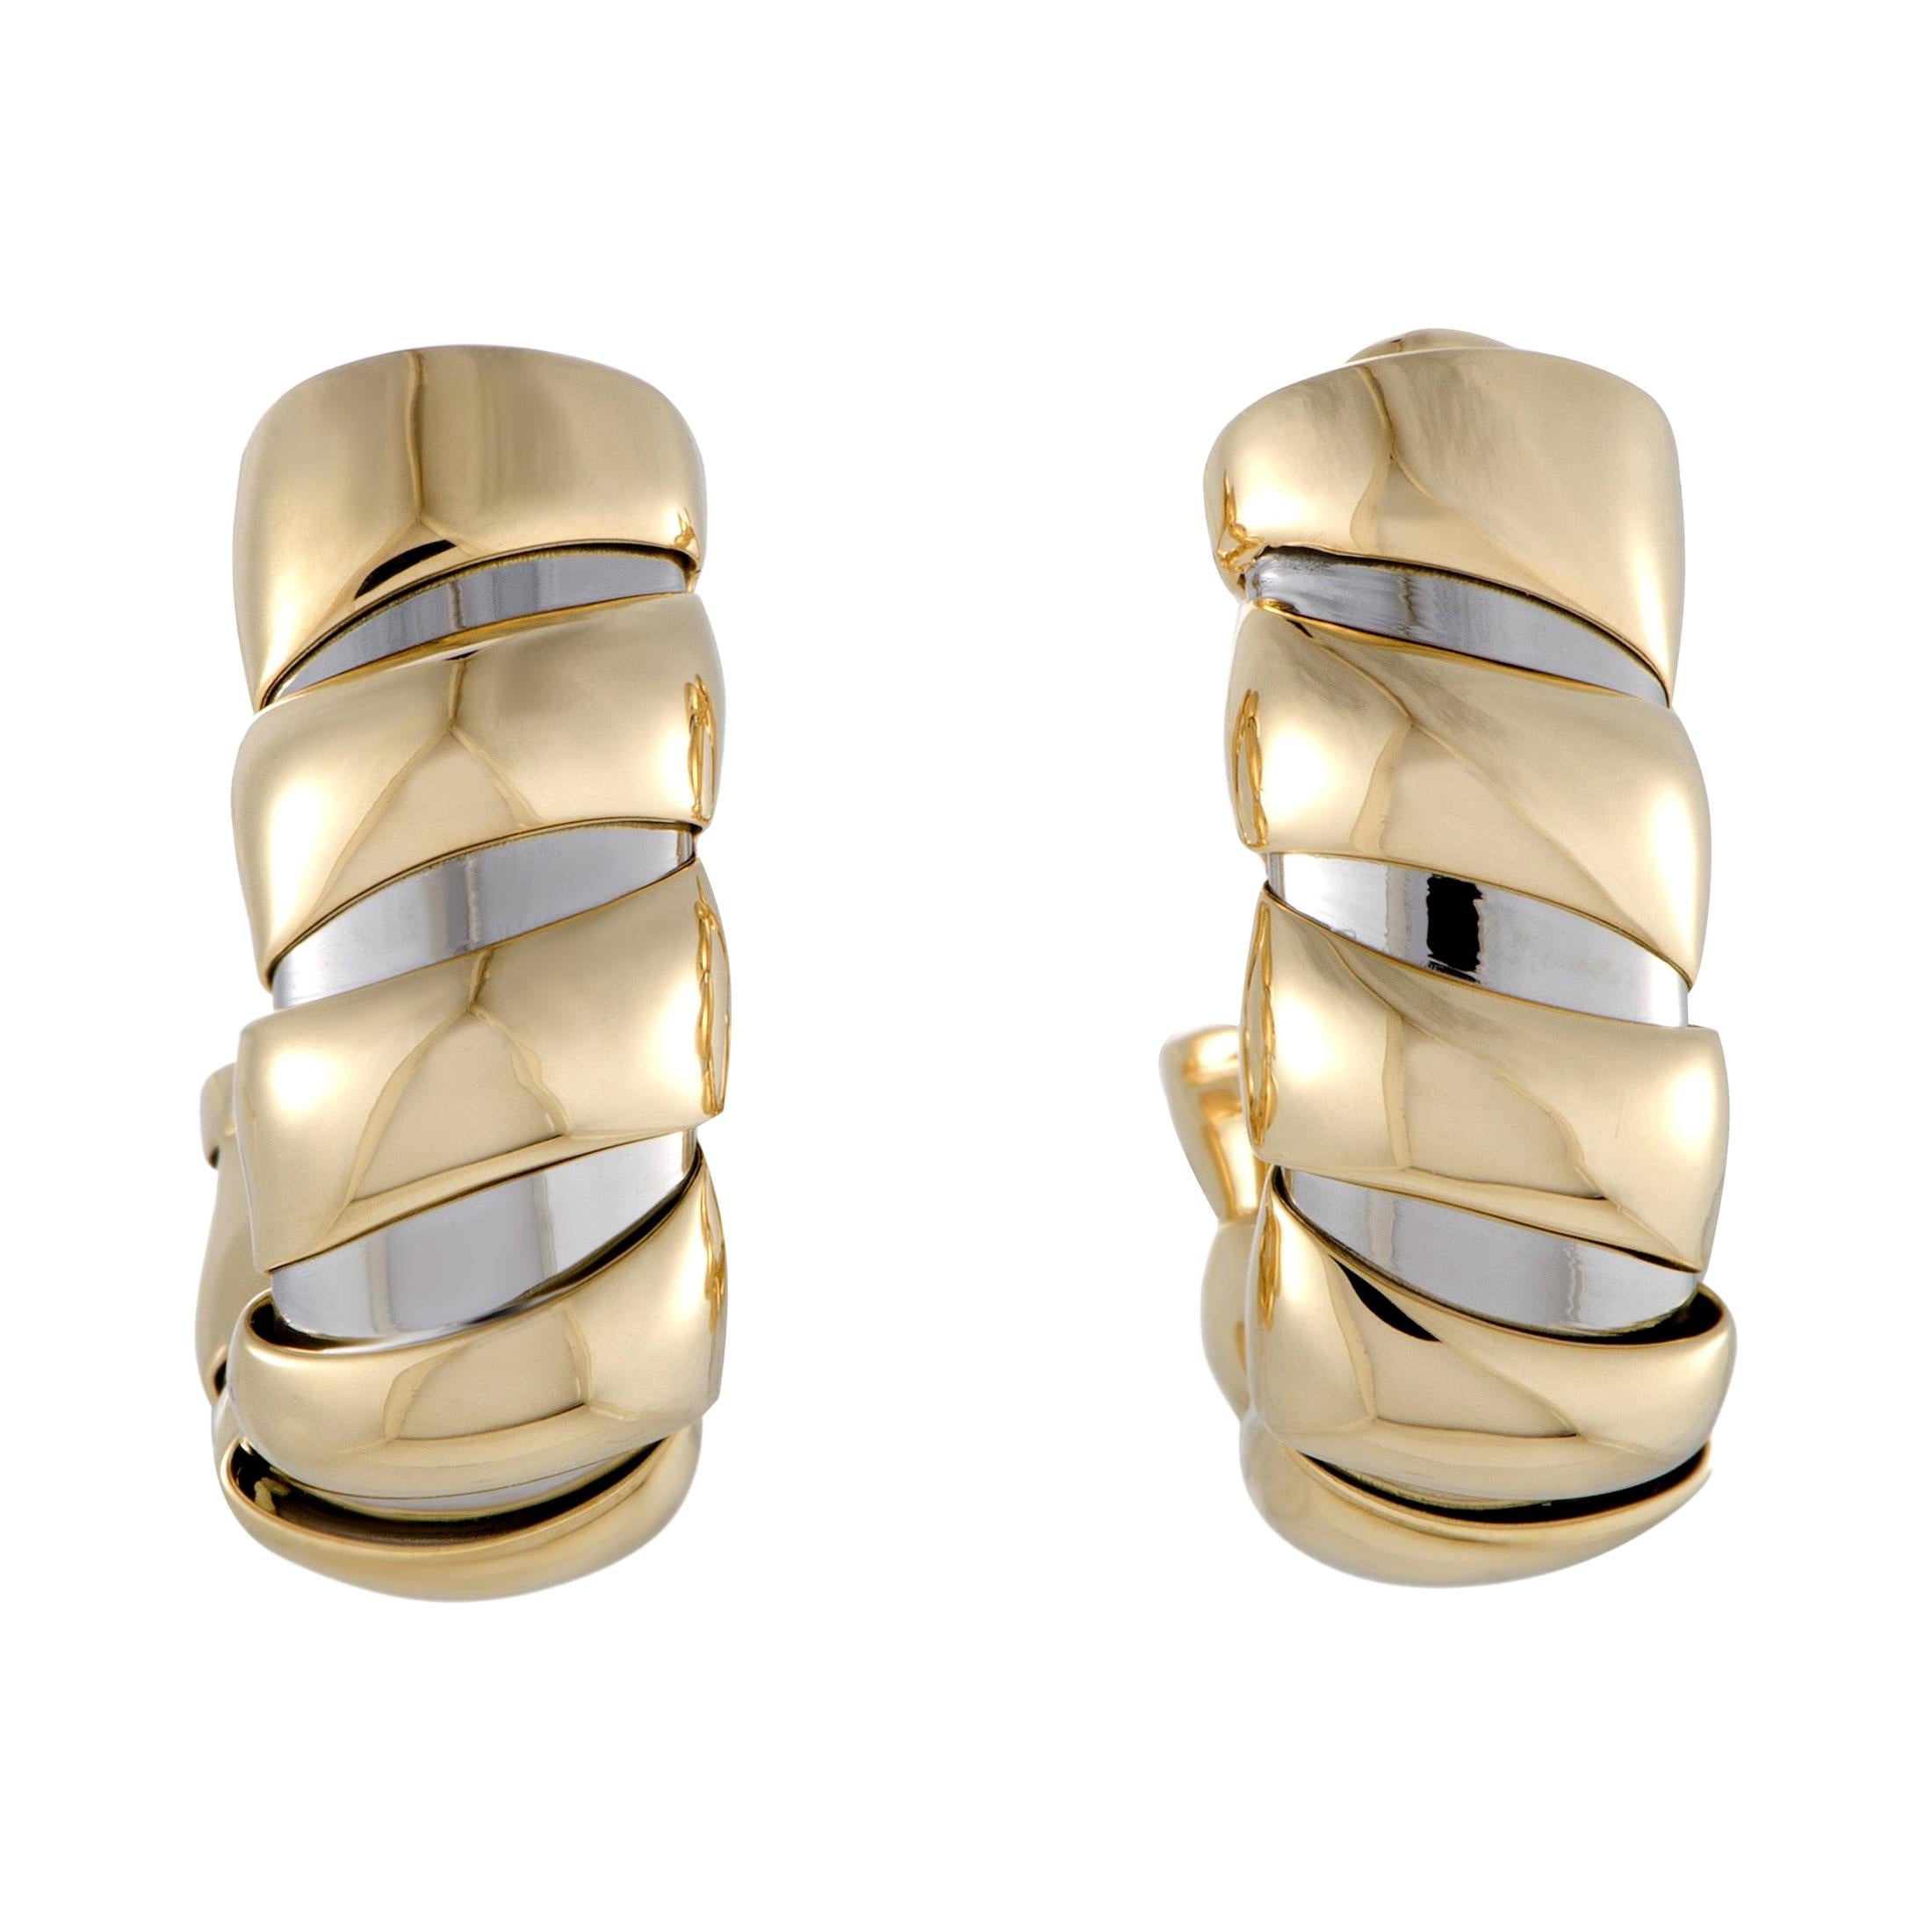 The acclaimed Bvlgari design codes are featured in this stunning pair of earrings whose bold style and offbeat choice of materials combine into creating a compellingly fashionable look. The earrings are expertly crafted from 18K yellow and 18K white